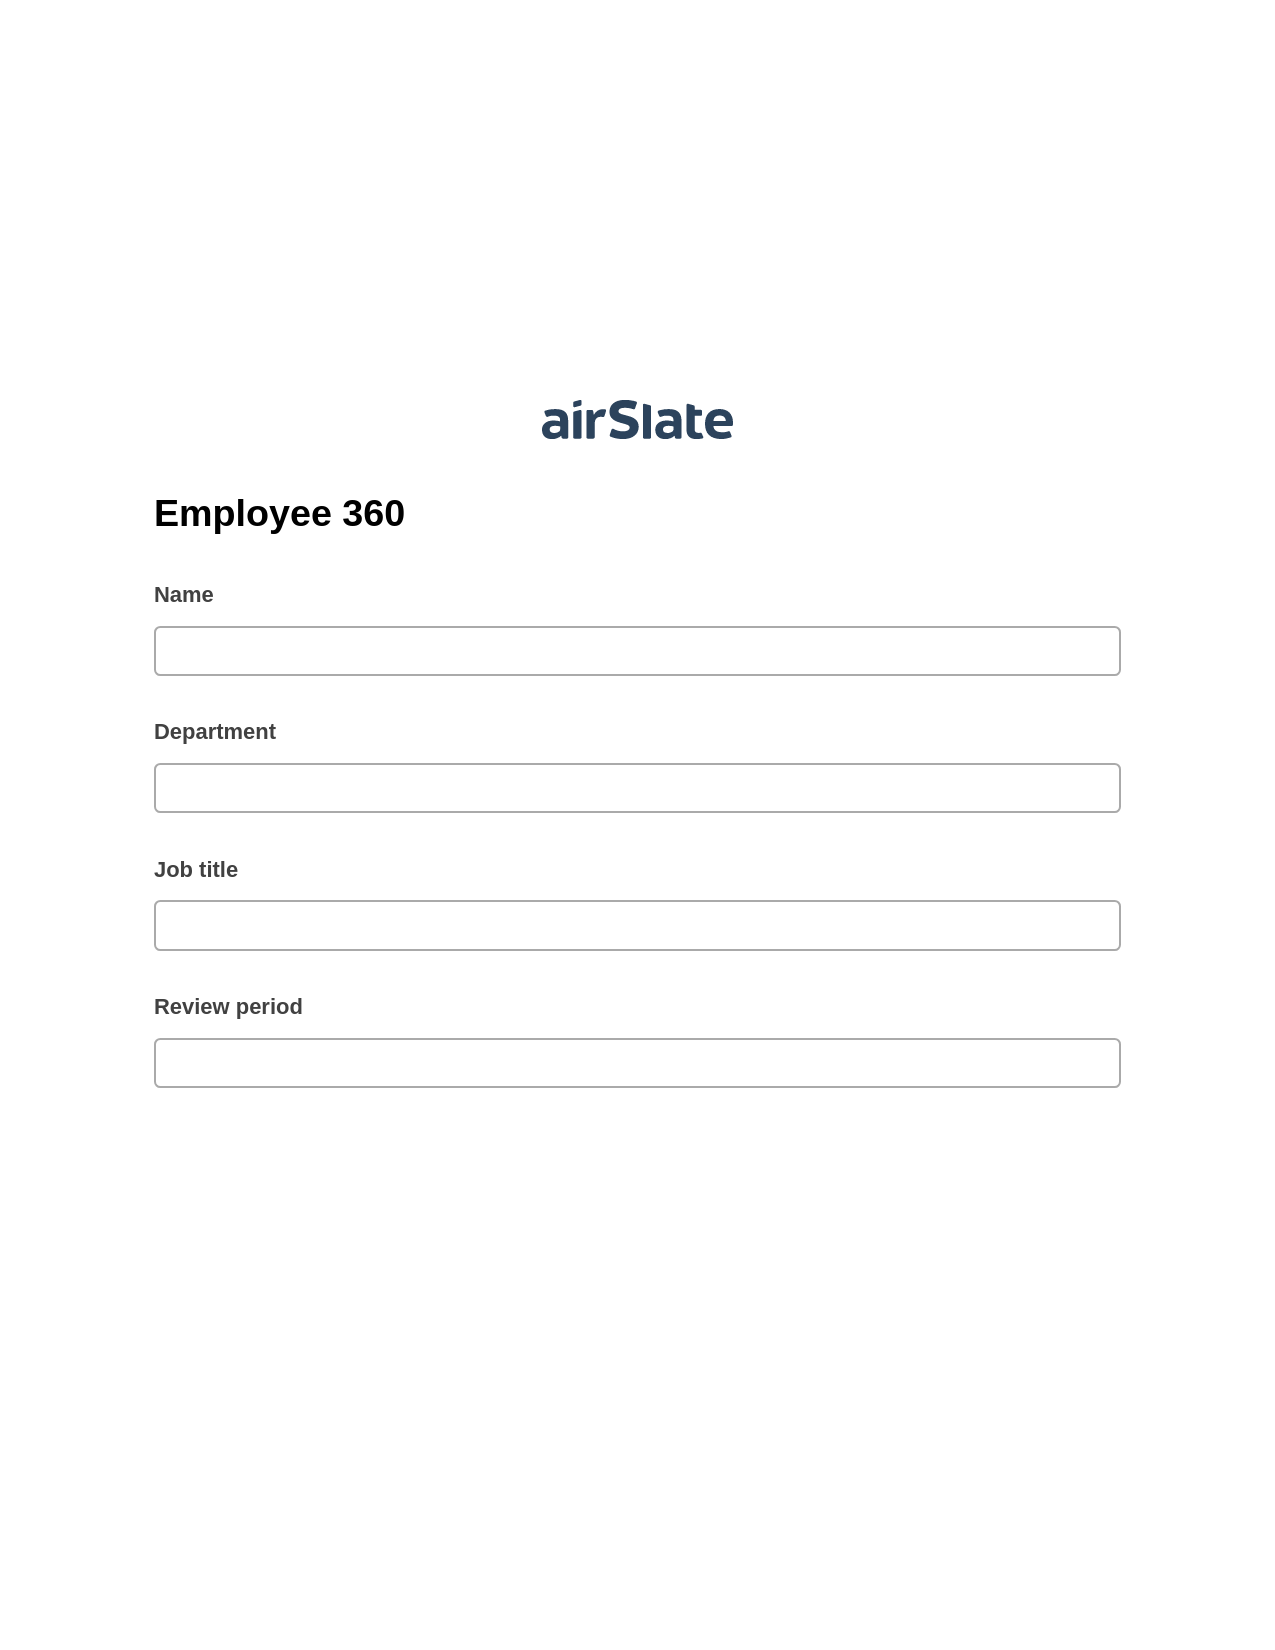 Multirole Employee 360 Pre-fill from Salesforce Records Bot, Google Cloud Print Bot, Export to Excel 365 Bot